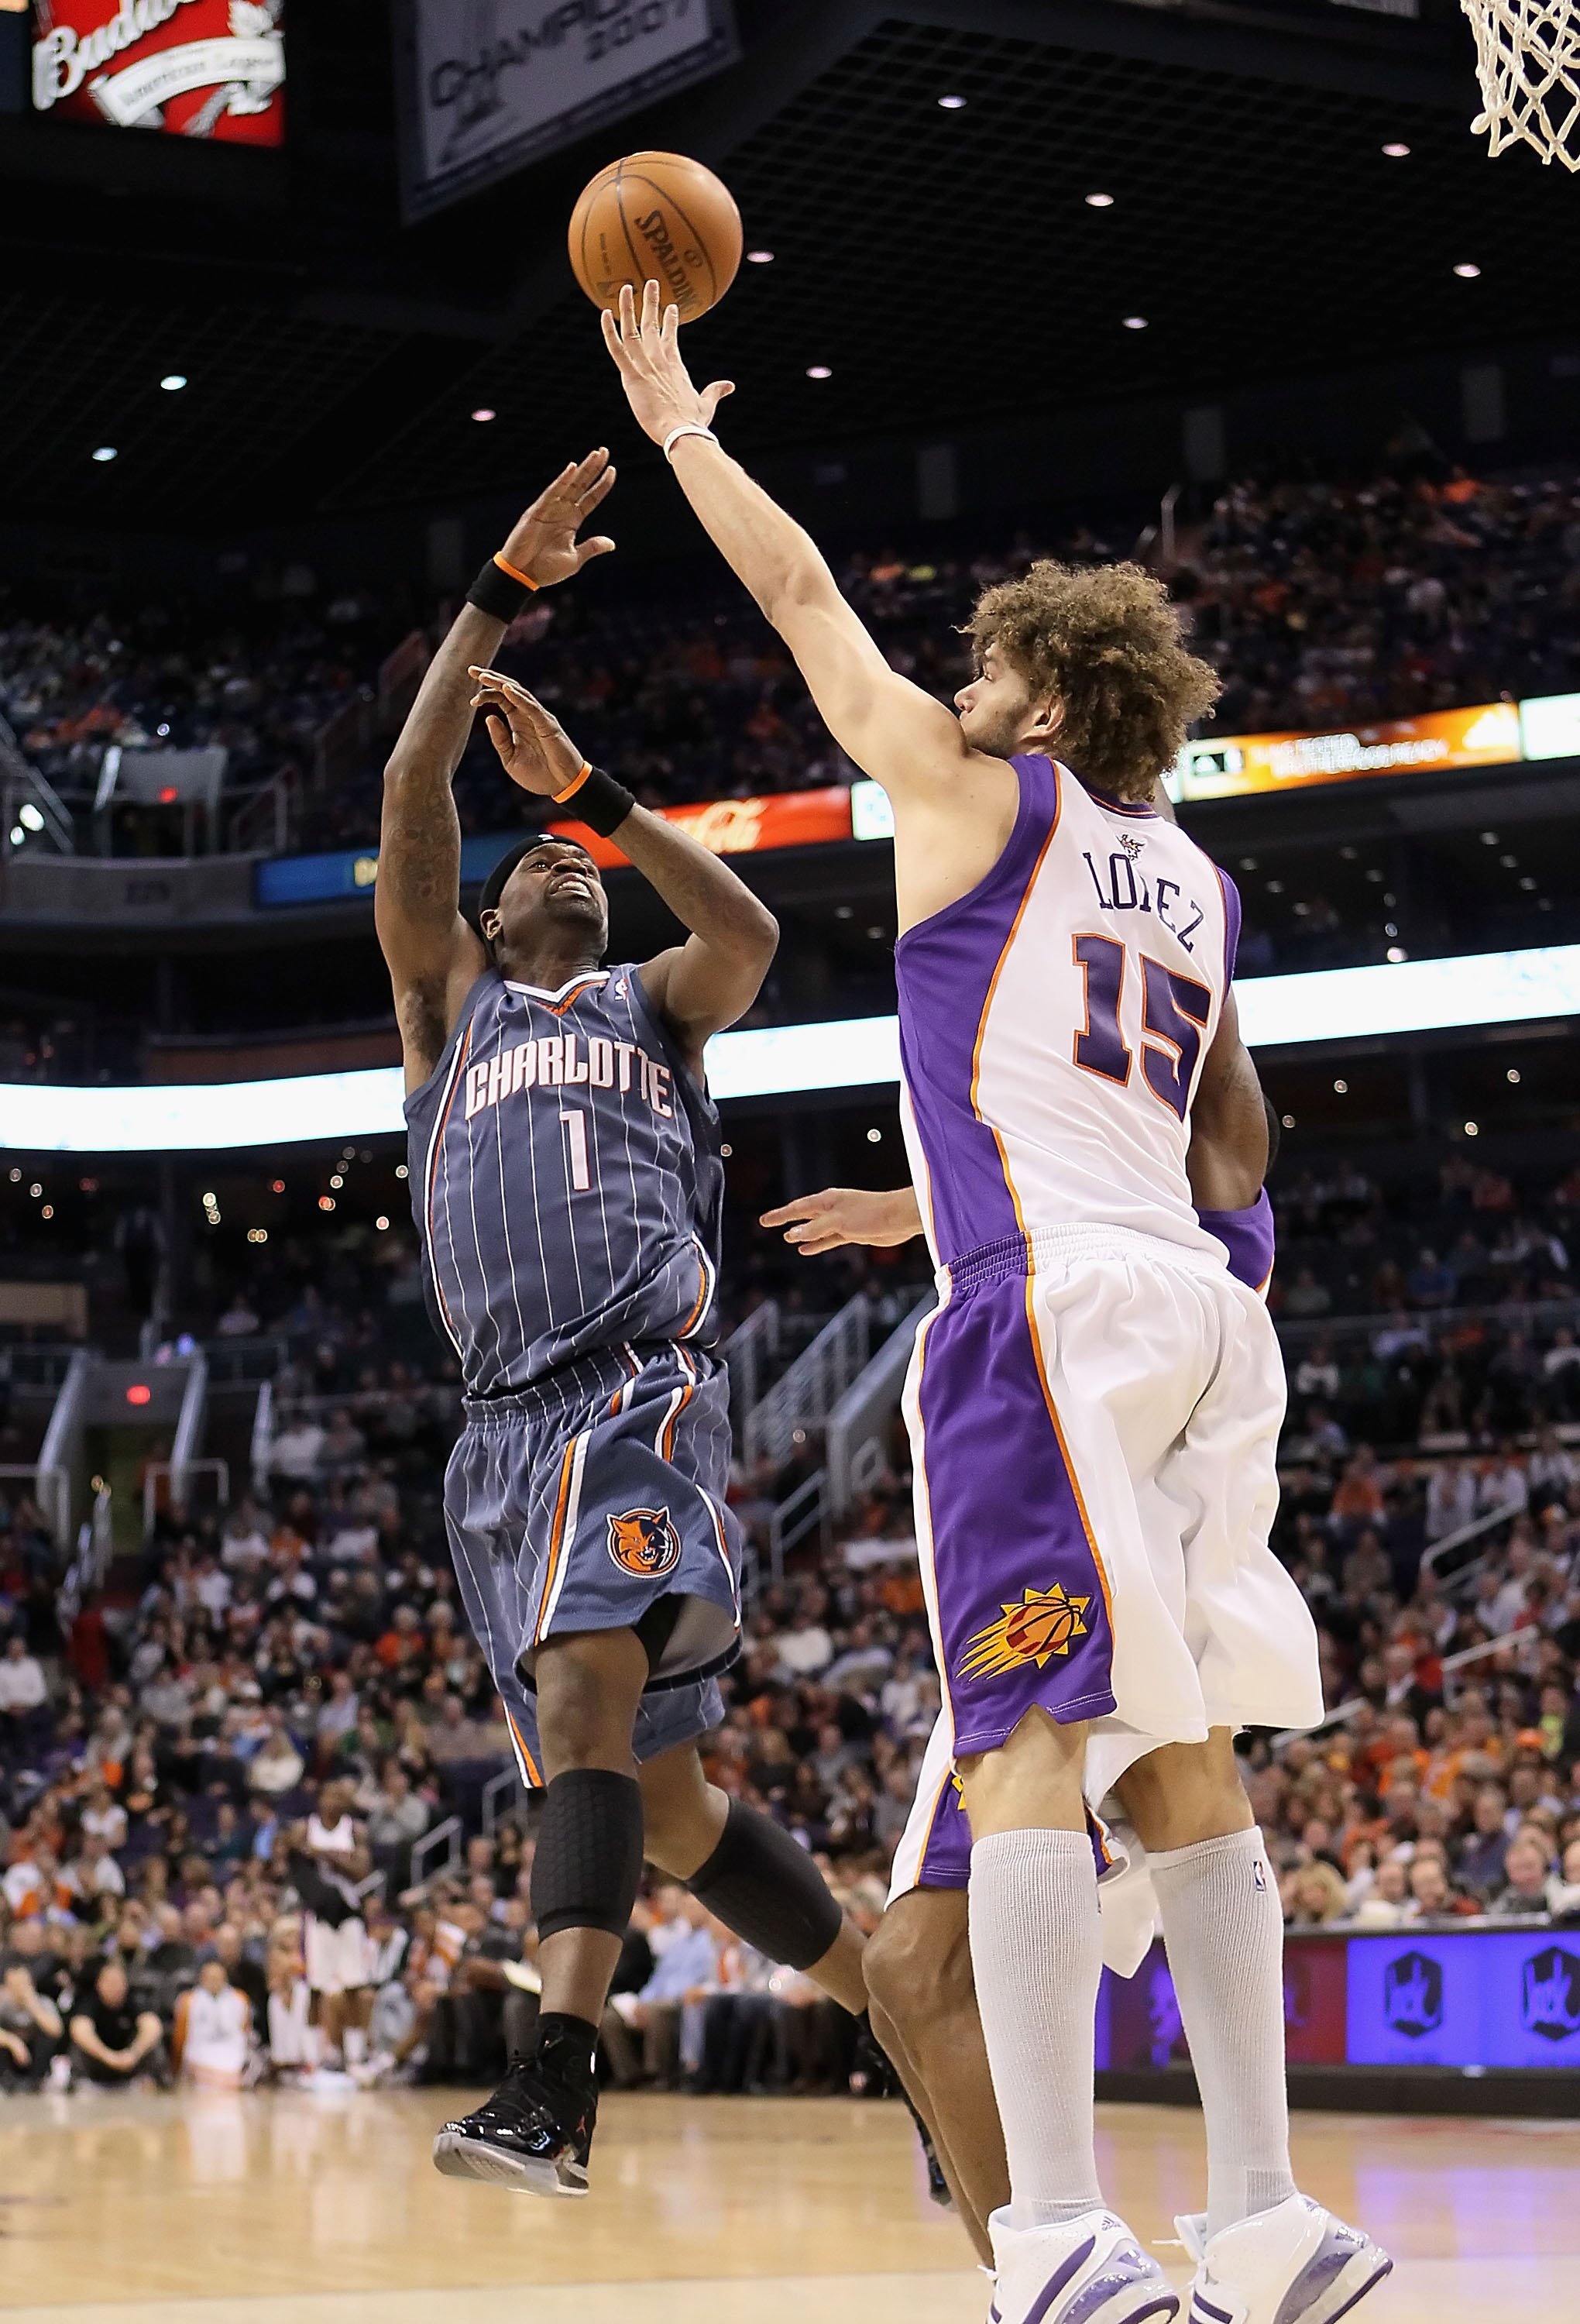 PHOENIX - JANUARY 26:  Stephen Jackson #1 of the Charlotte Bobcats puts up a shot during the NBA game against the Phoenix Suns at US Airways Center on January 26, 2010 in Phoenix, Arizona. The Bobcats defeated the Suns in overtime.  114-109.  NOTE TO USER